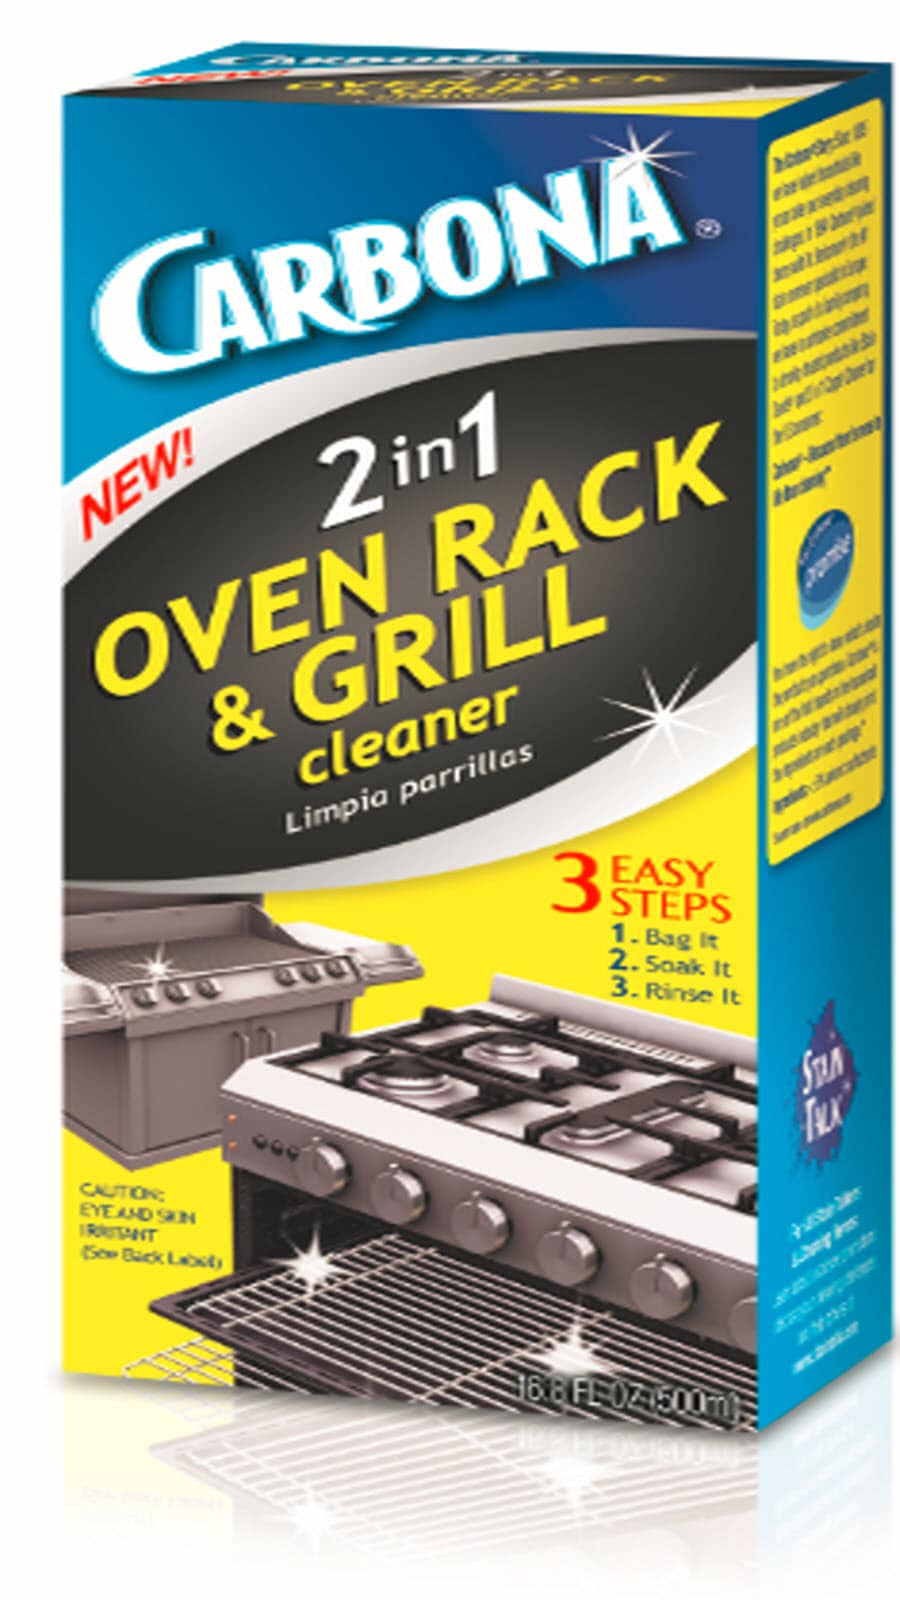 Carbona 2-In-1 Oven Rack And Grill Cleaner Bagged 16.8 Oz